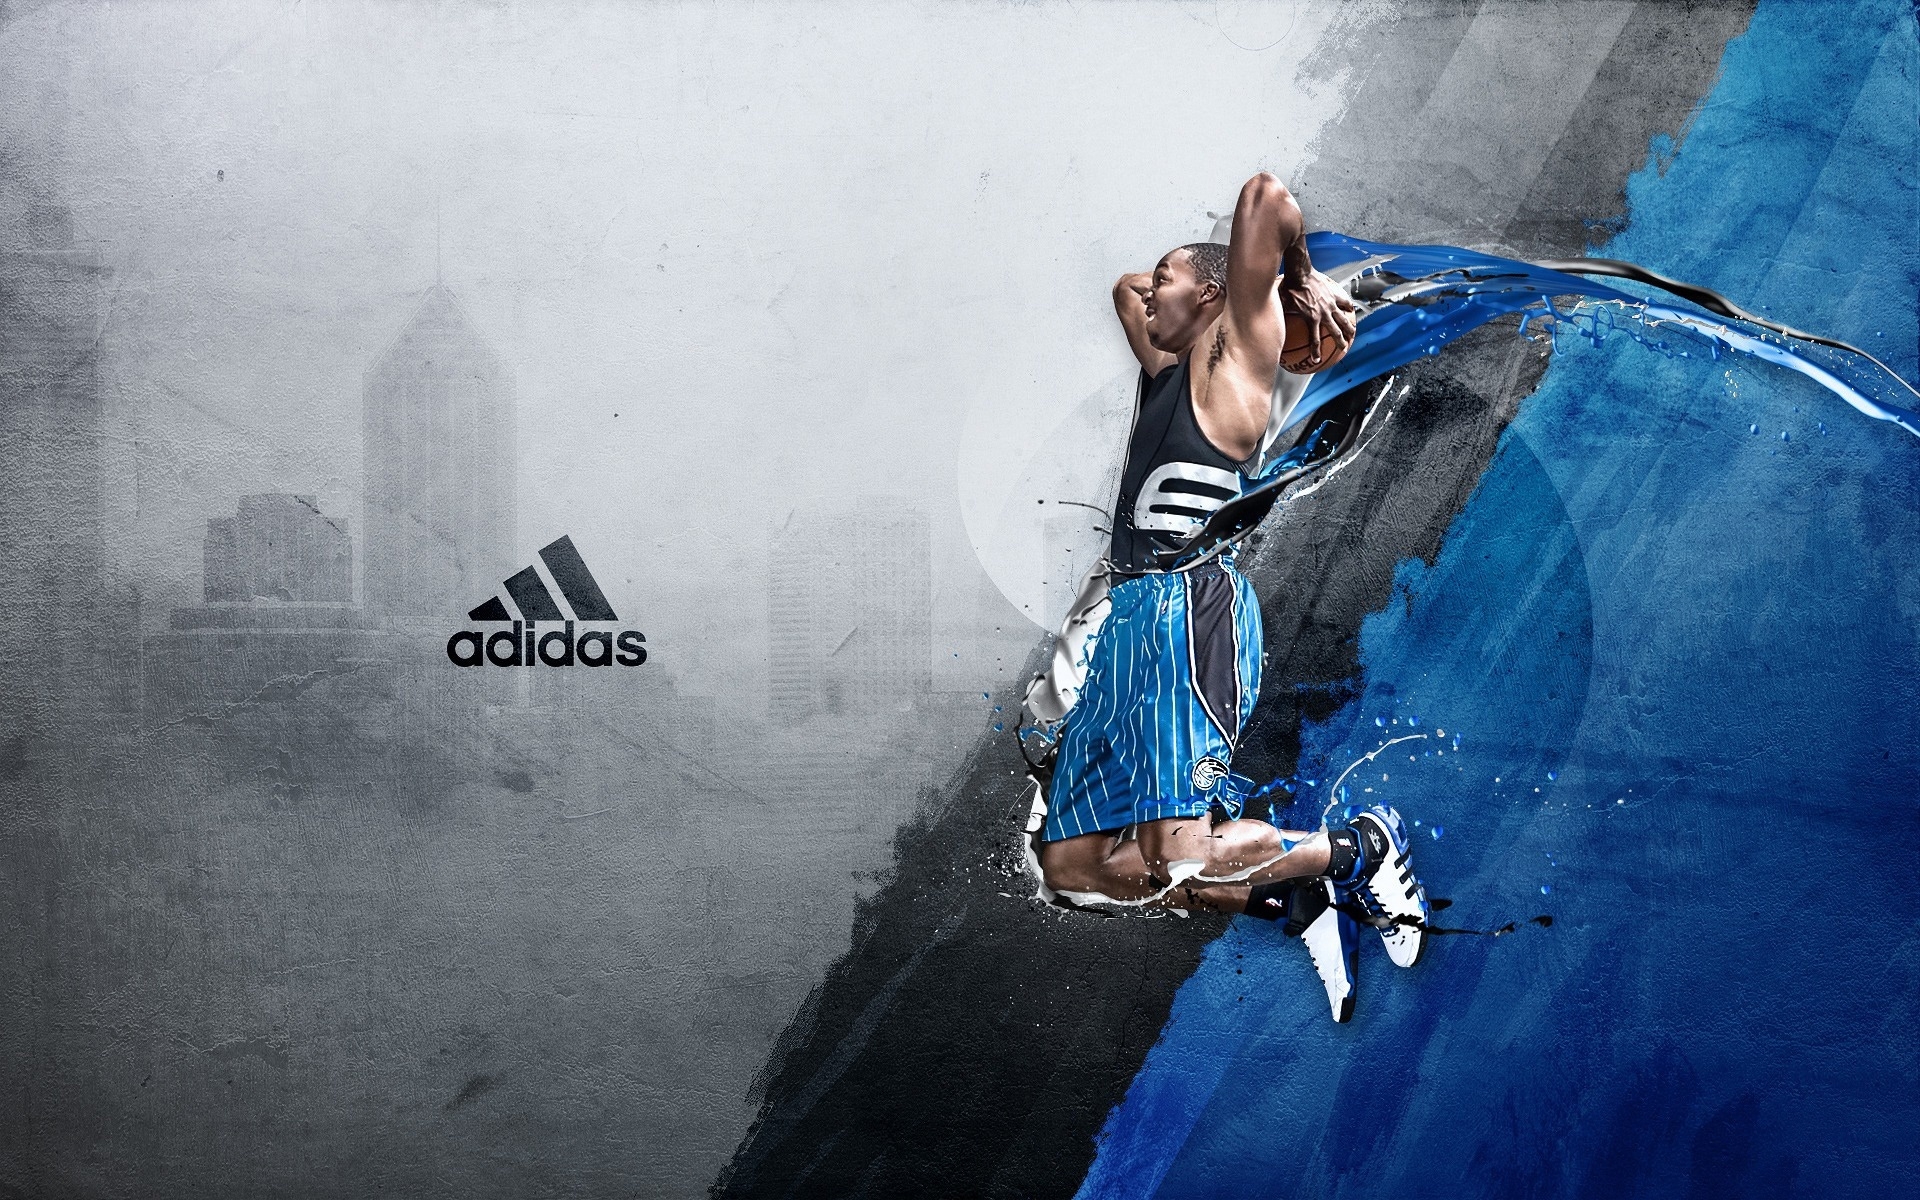 Dwight Howard Adidas for 1920 x 1200 widescreen resolution